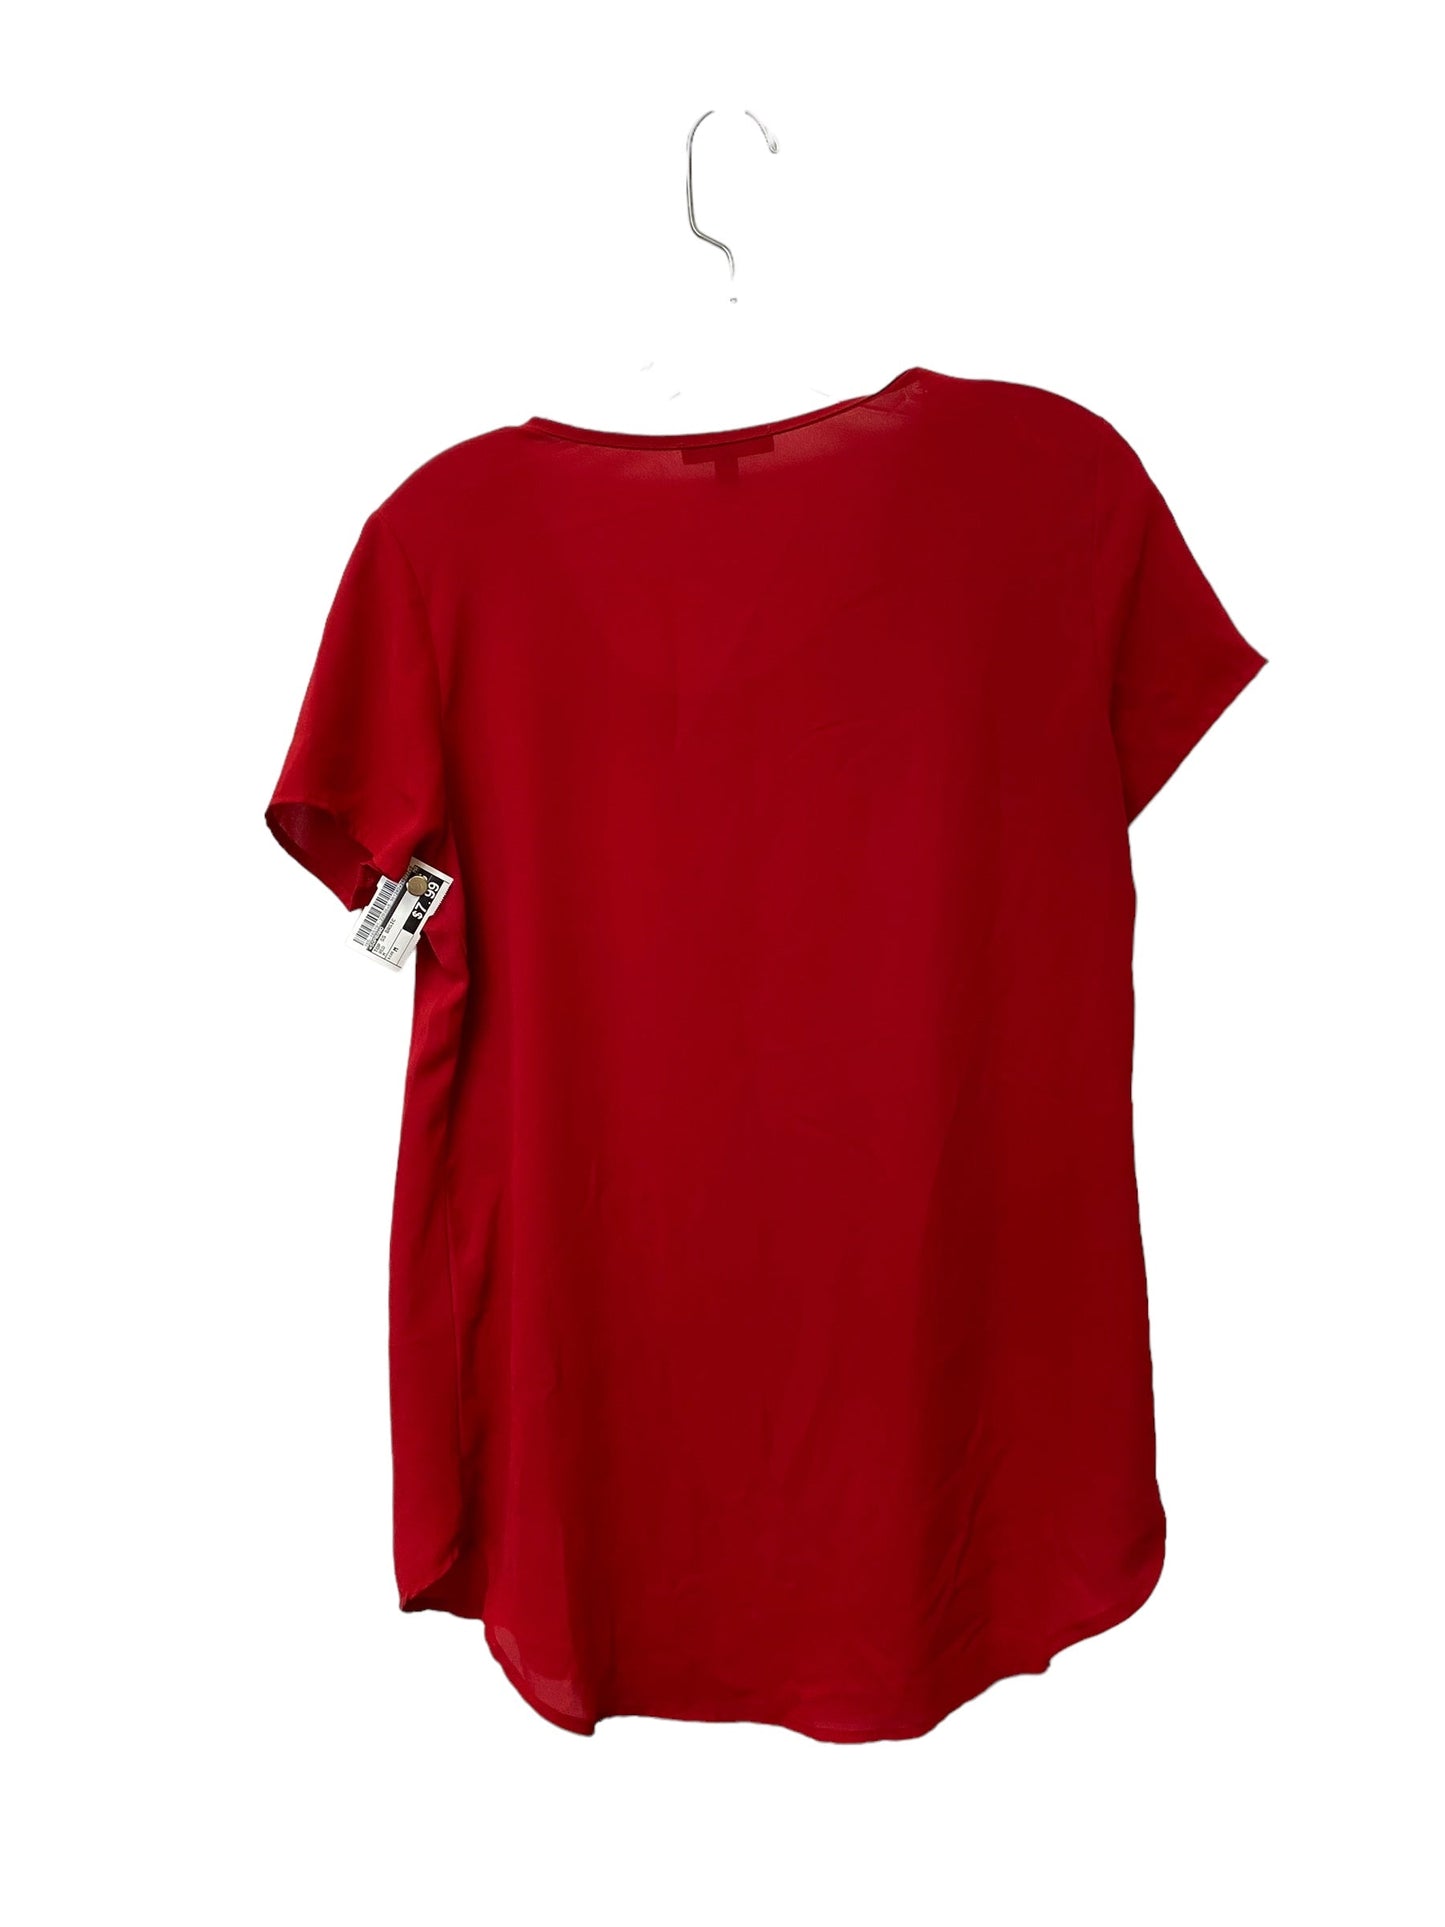 Red Top Short Sleeve Basic Soprano, Size M